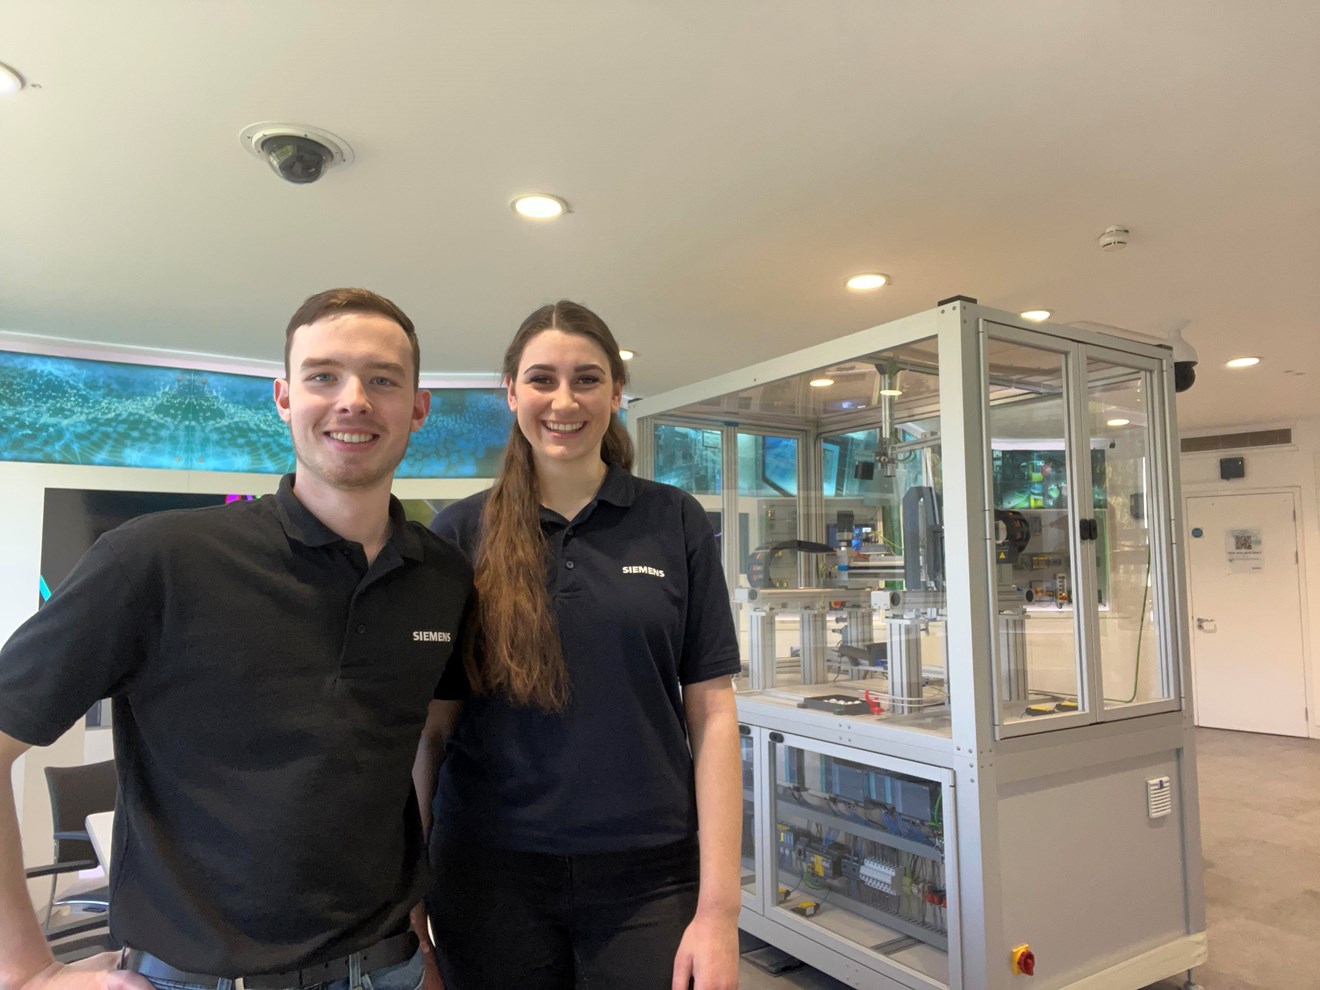 Siemens apprentices going for gold at WorldSkills competition: Siemens apprentices Lucy Yelland and Ben Love are taking part in the National Finals of the 2022 WorldSkills UK competition (1)